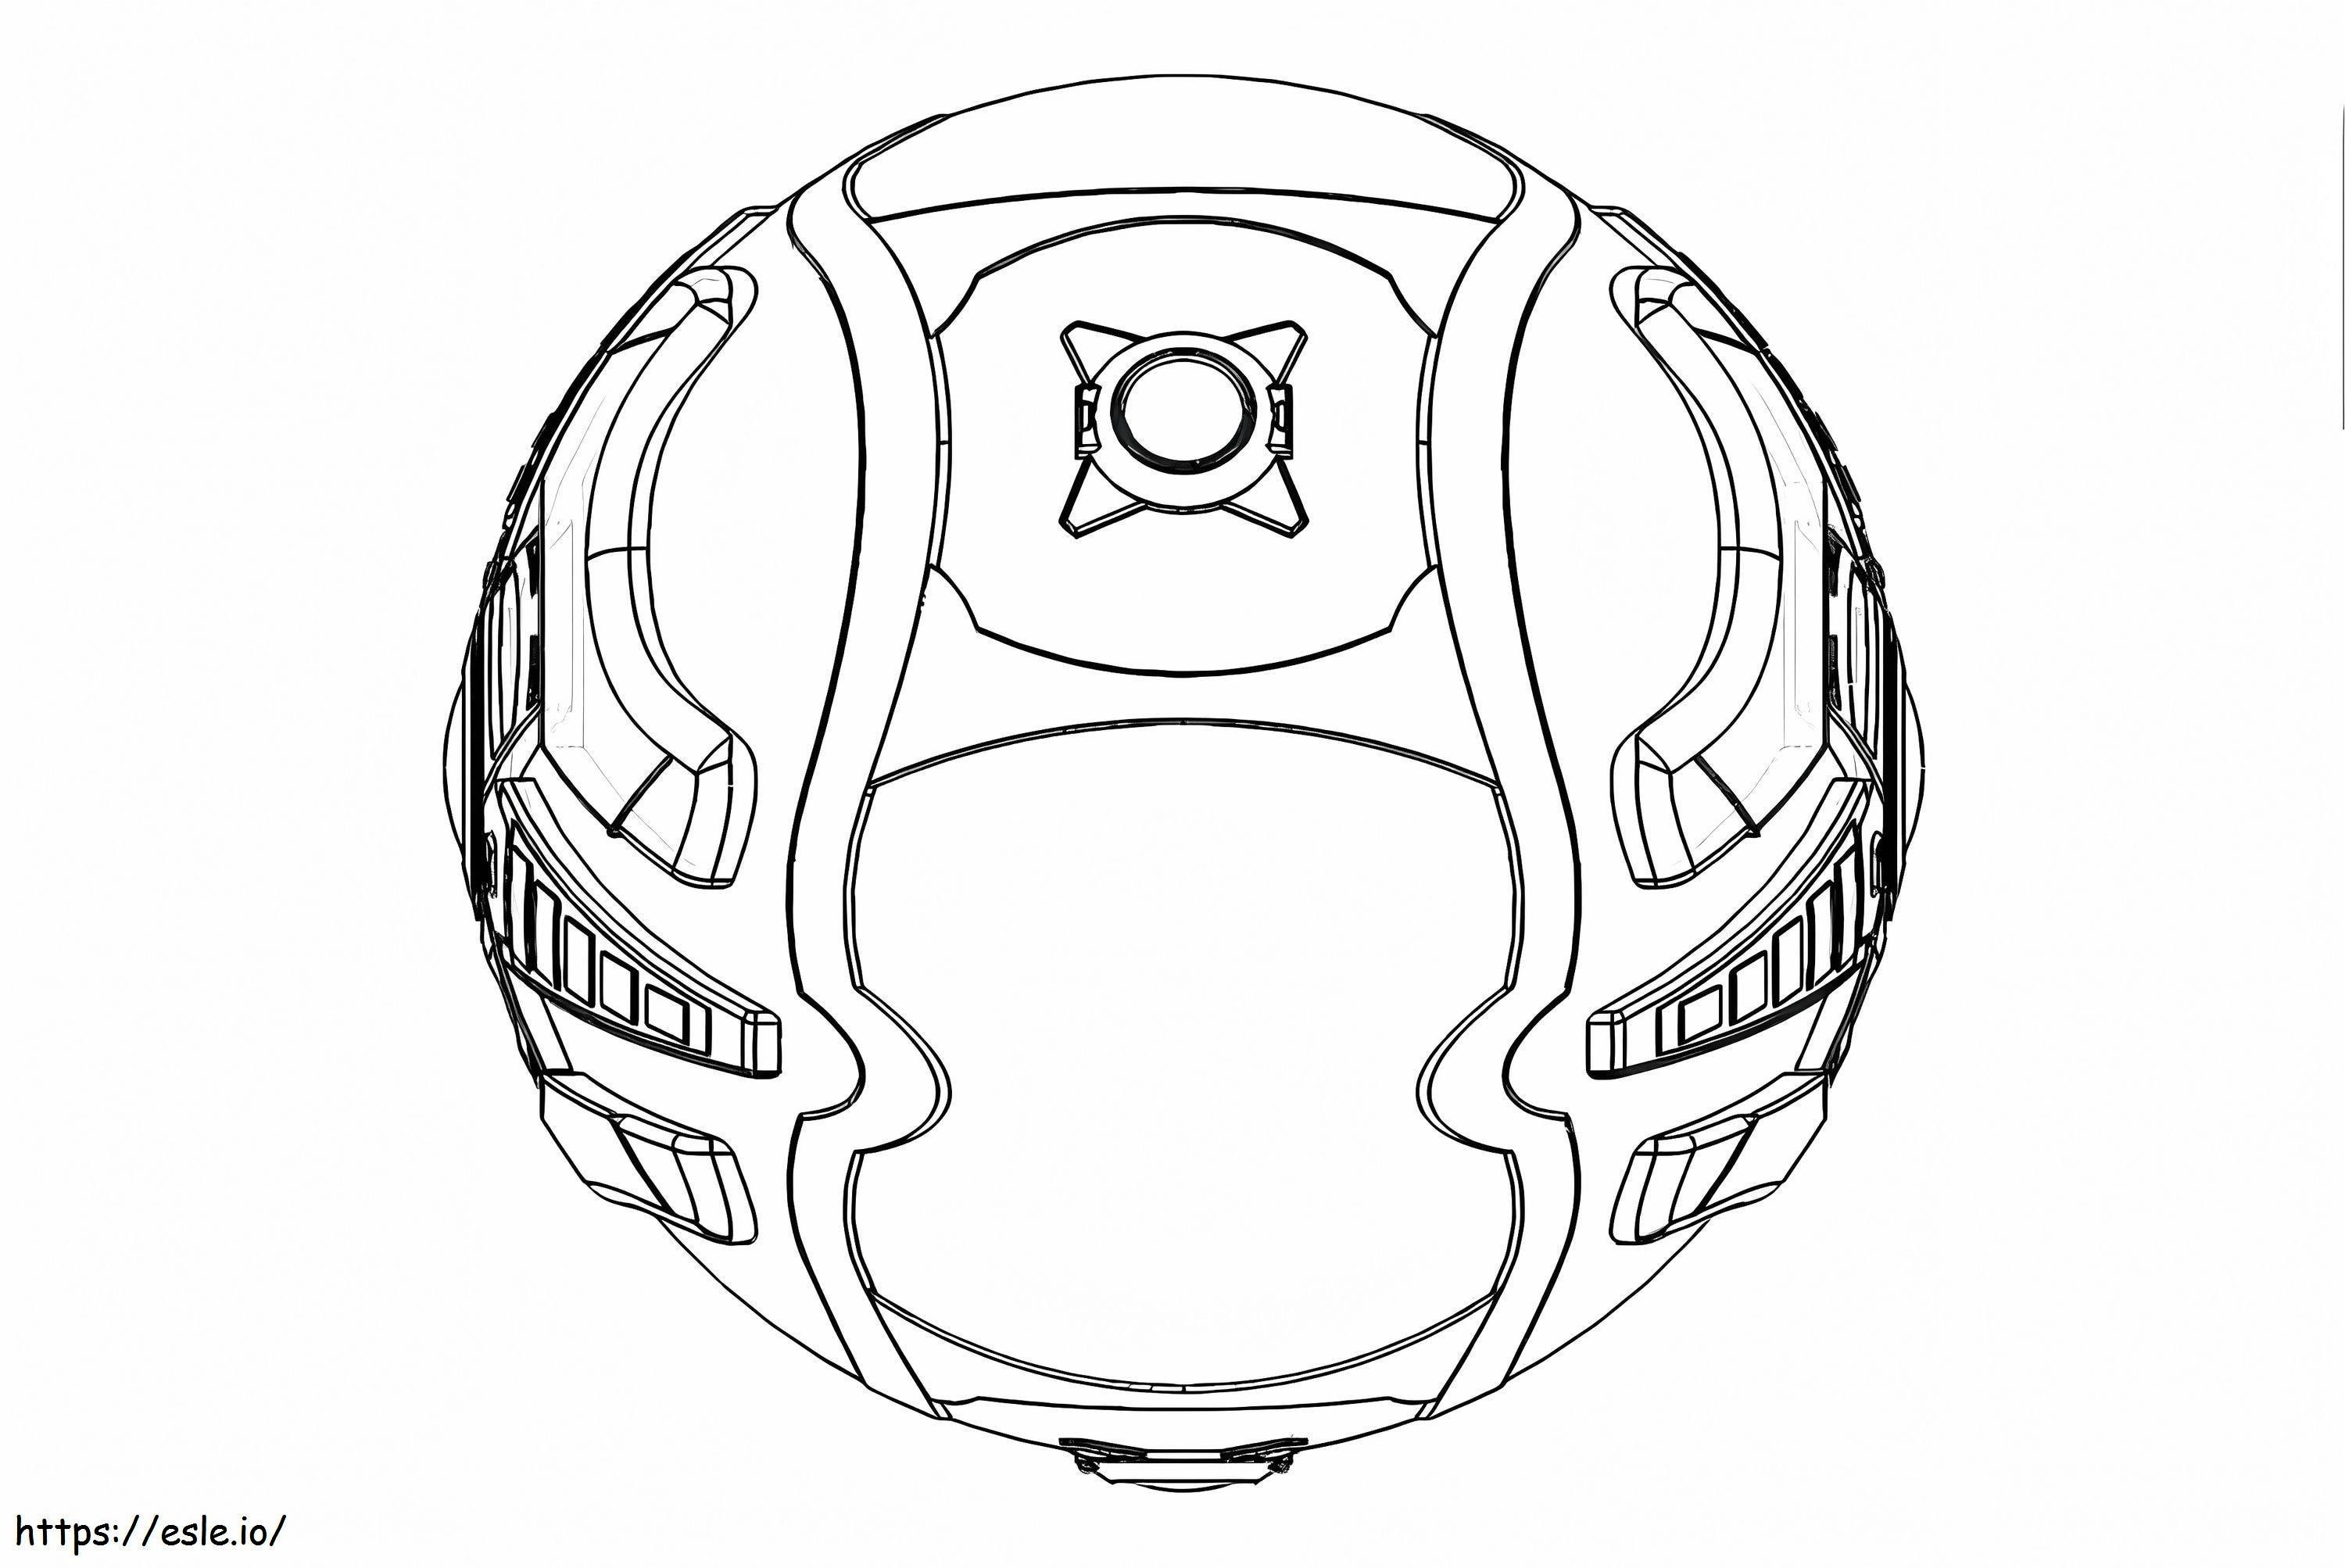 Rocket League Ball coloring page